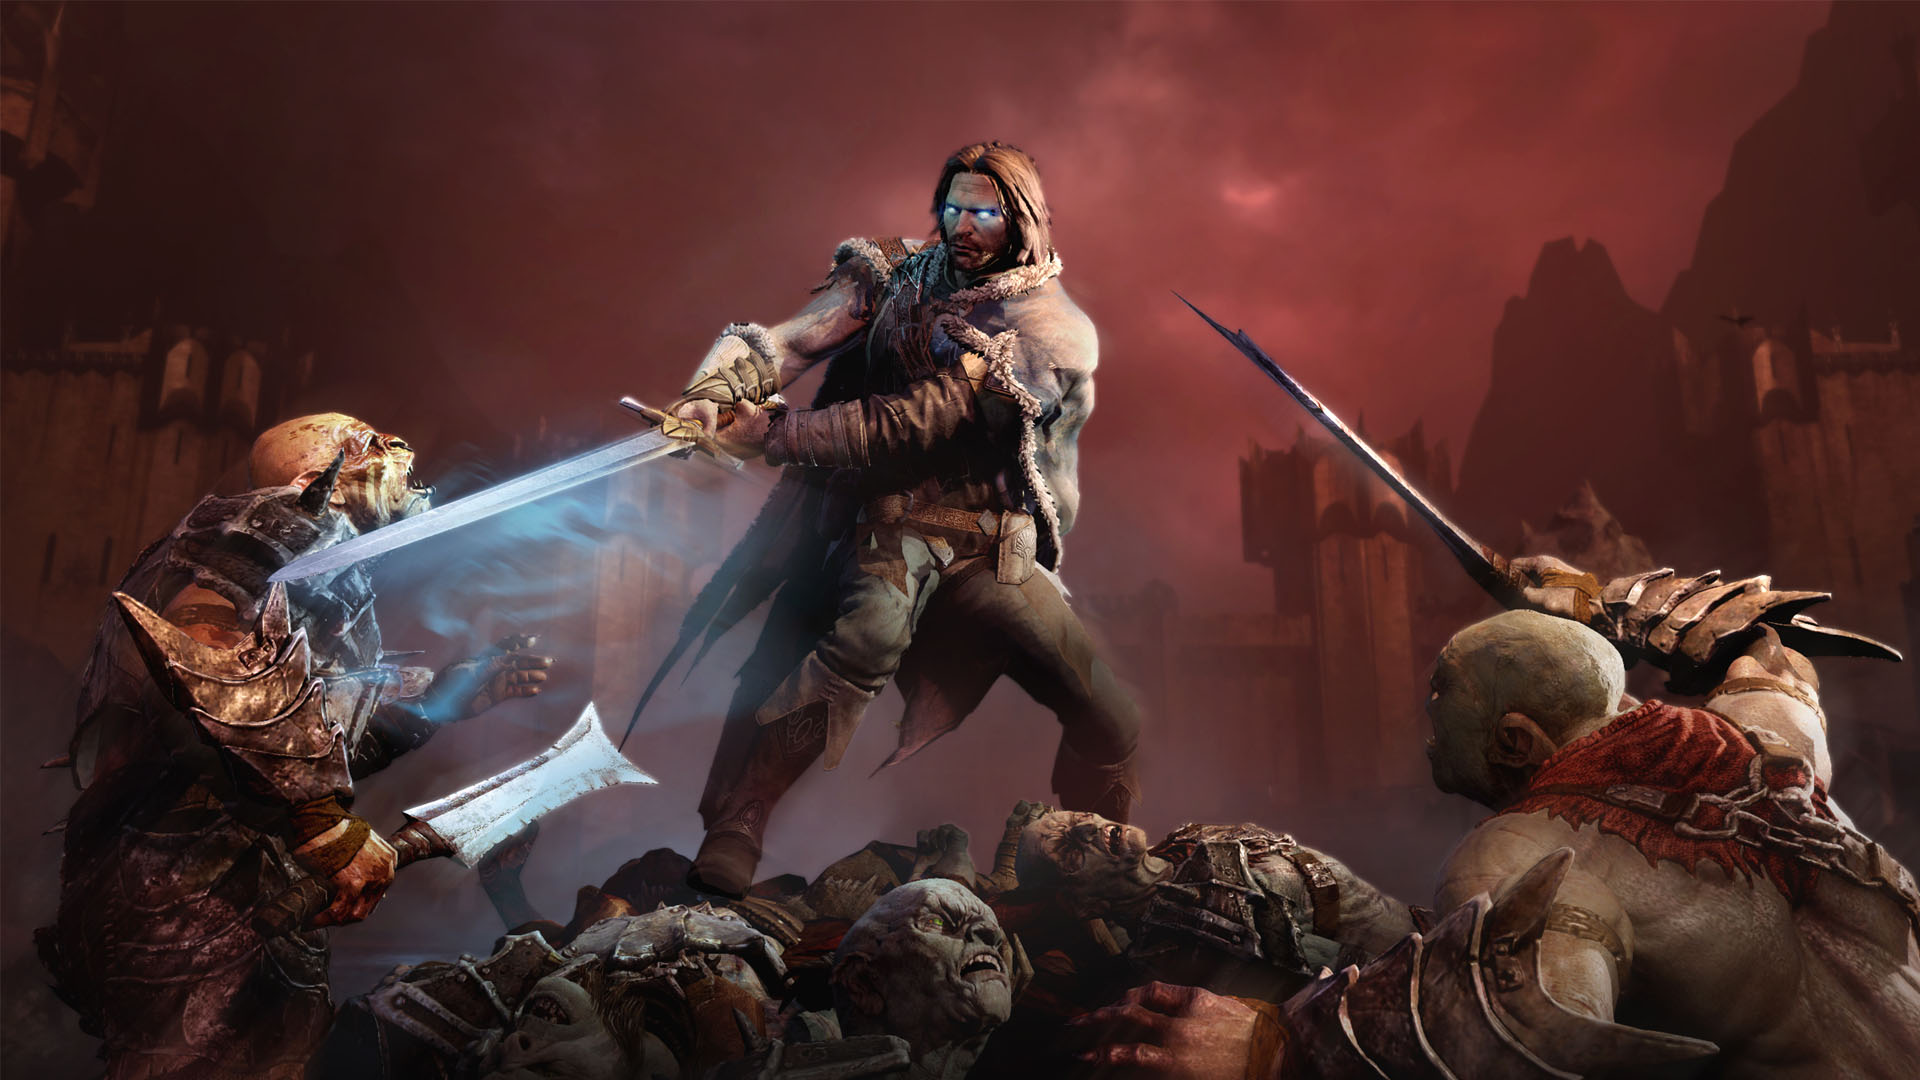 Middle-Earth: Shadow of Mordor - Complete DLC Bundle Steam CD Key, $5.64